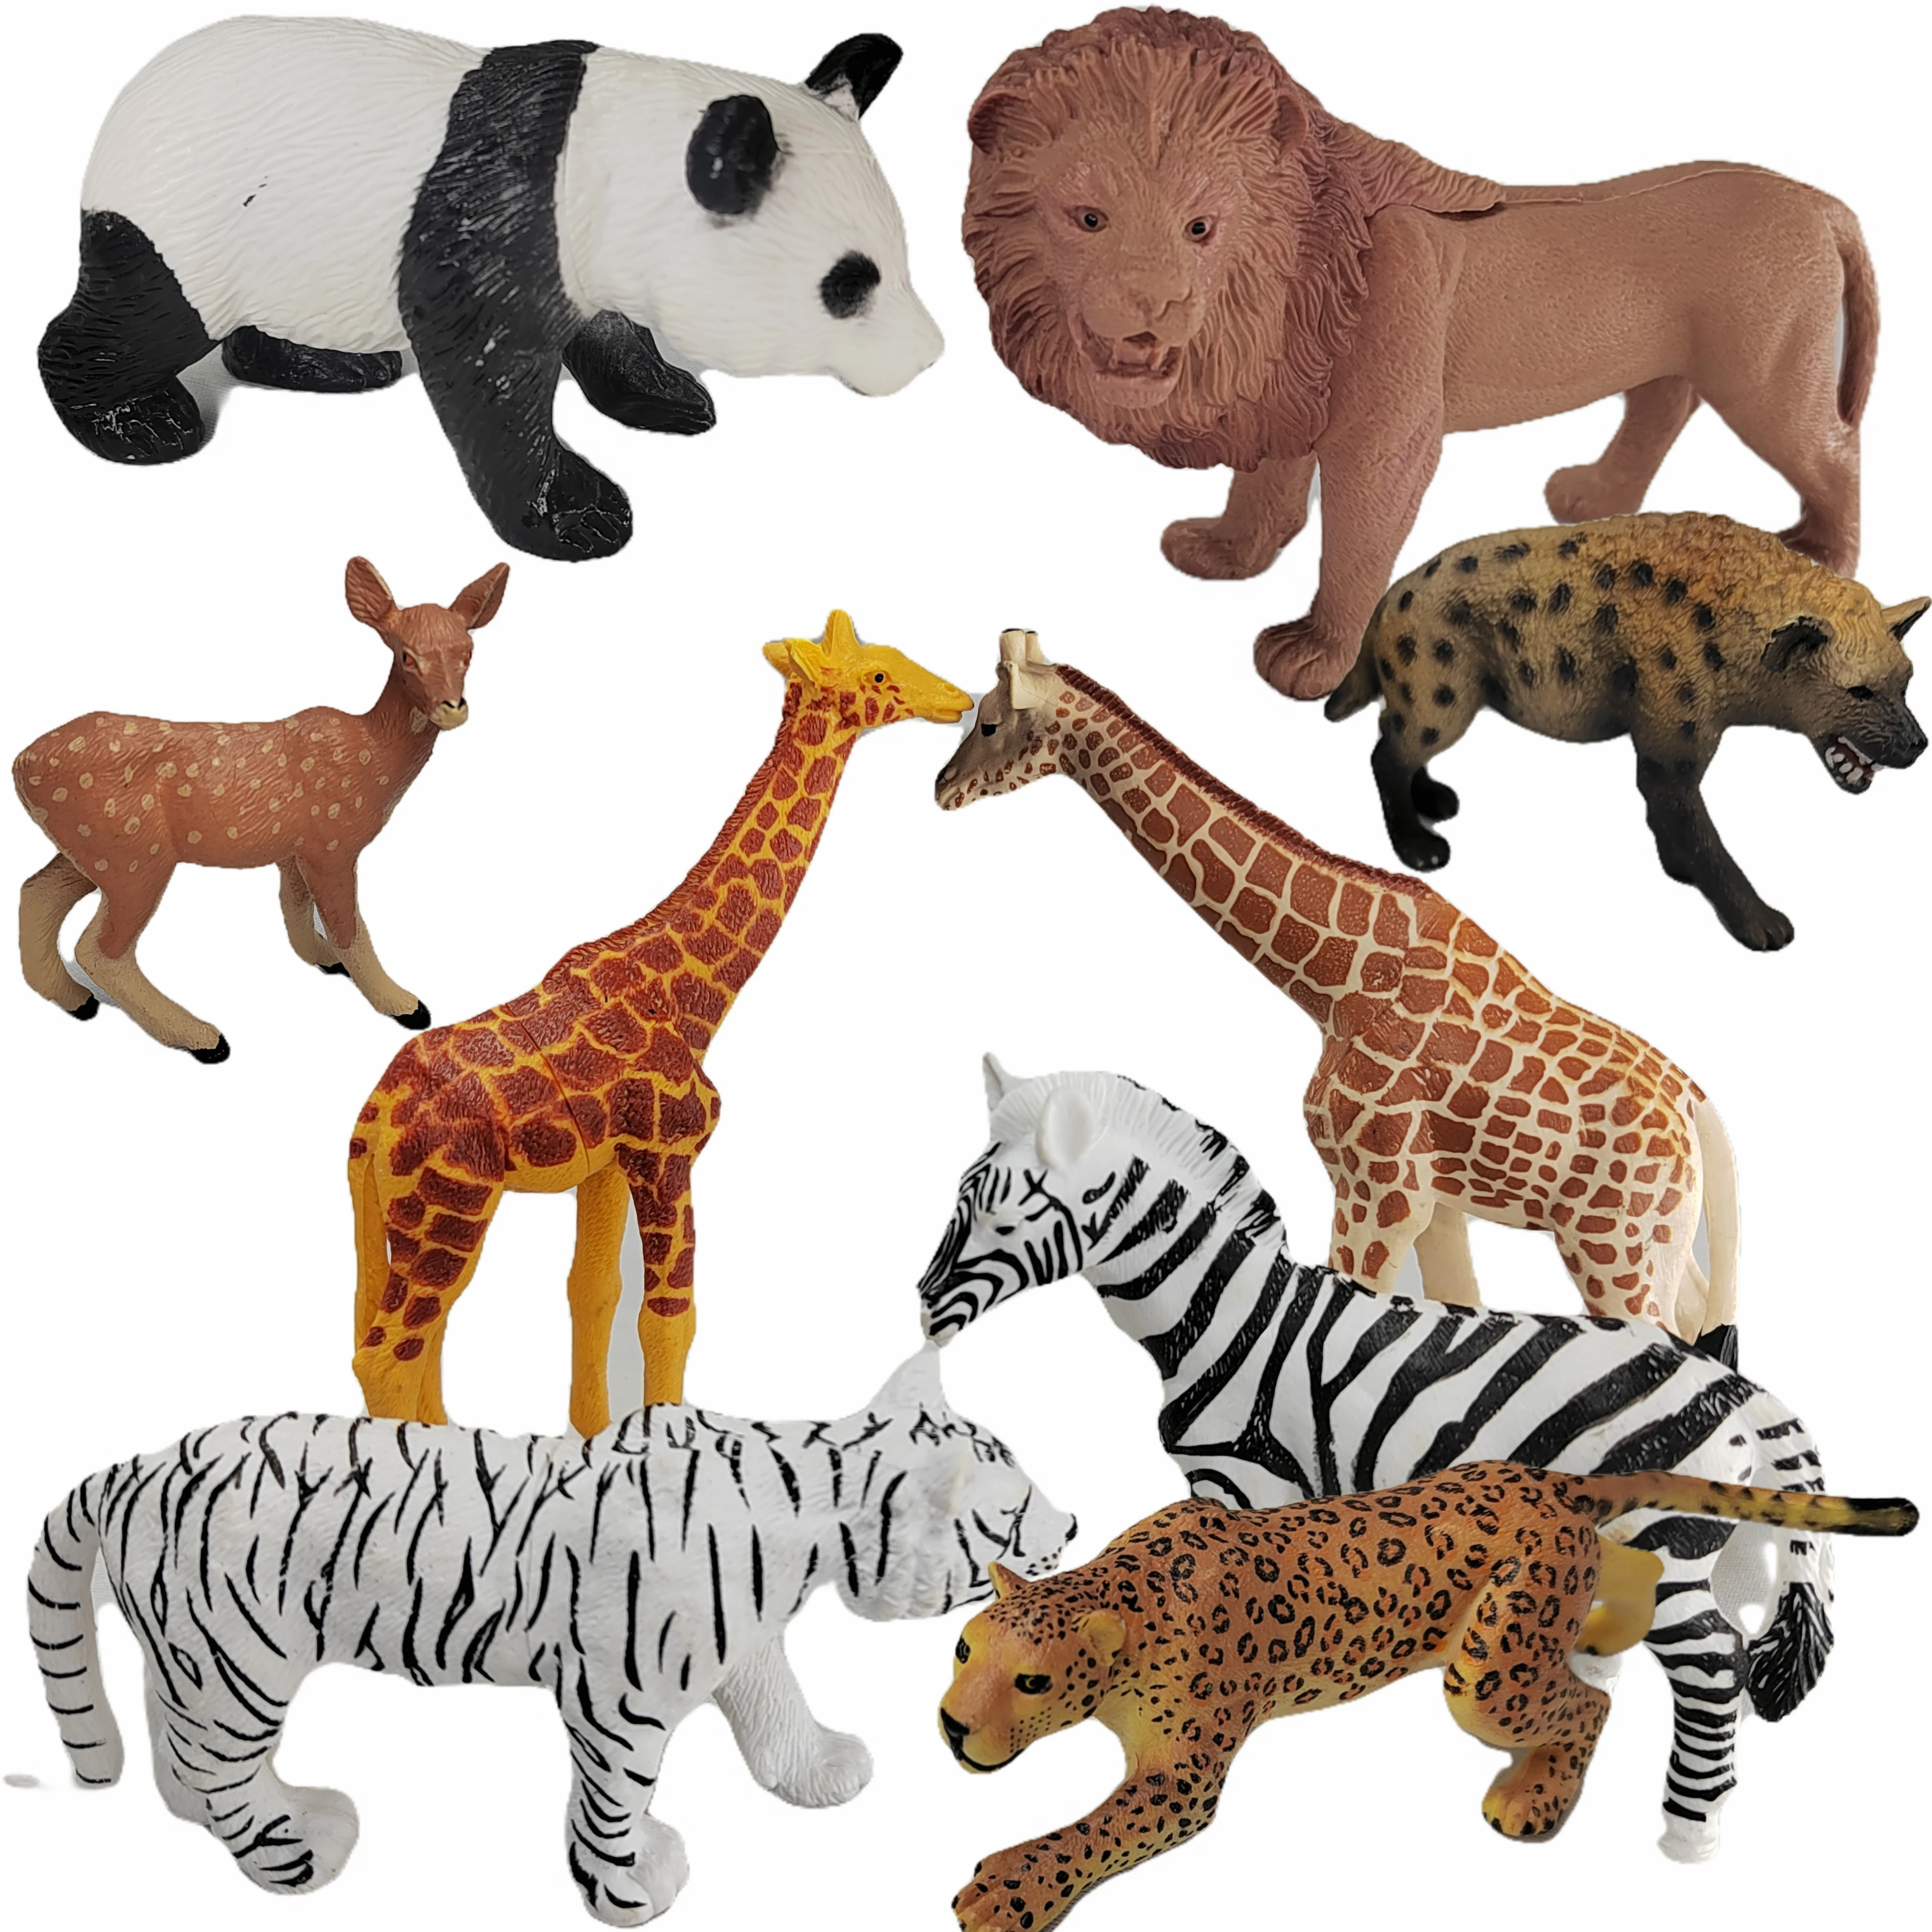 

Simulation Wild Zoo Animal Chimpanzees Lion Tiger Horse Model Action Figures Bear Hippo Ostrich Rhino Figurines toy for children